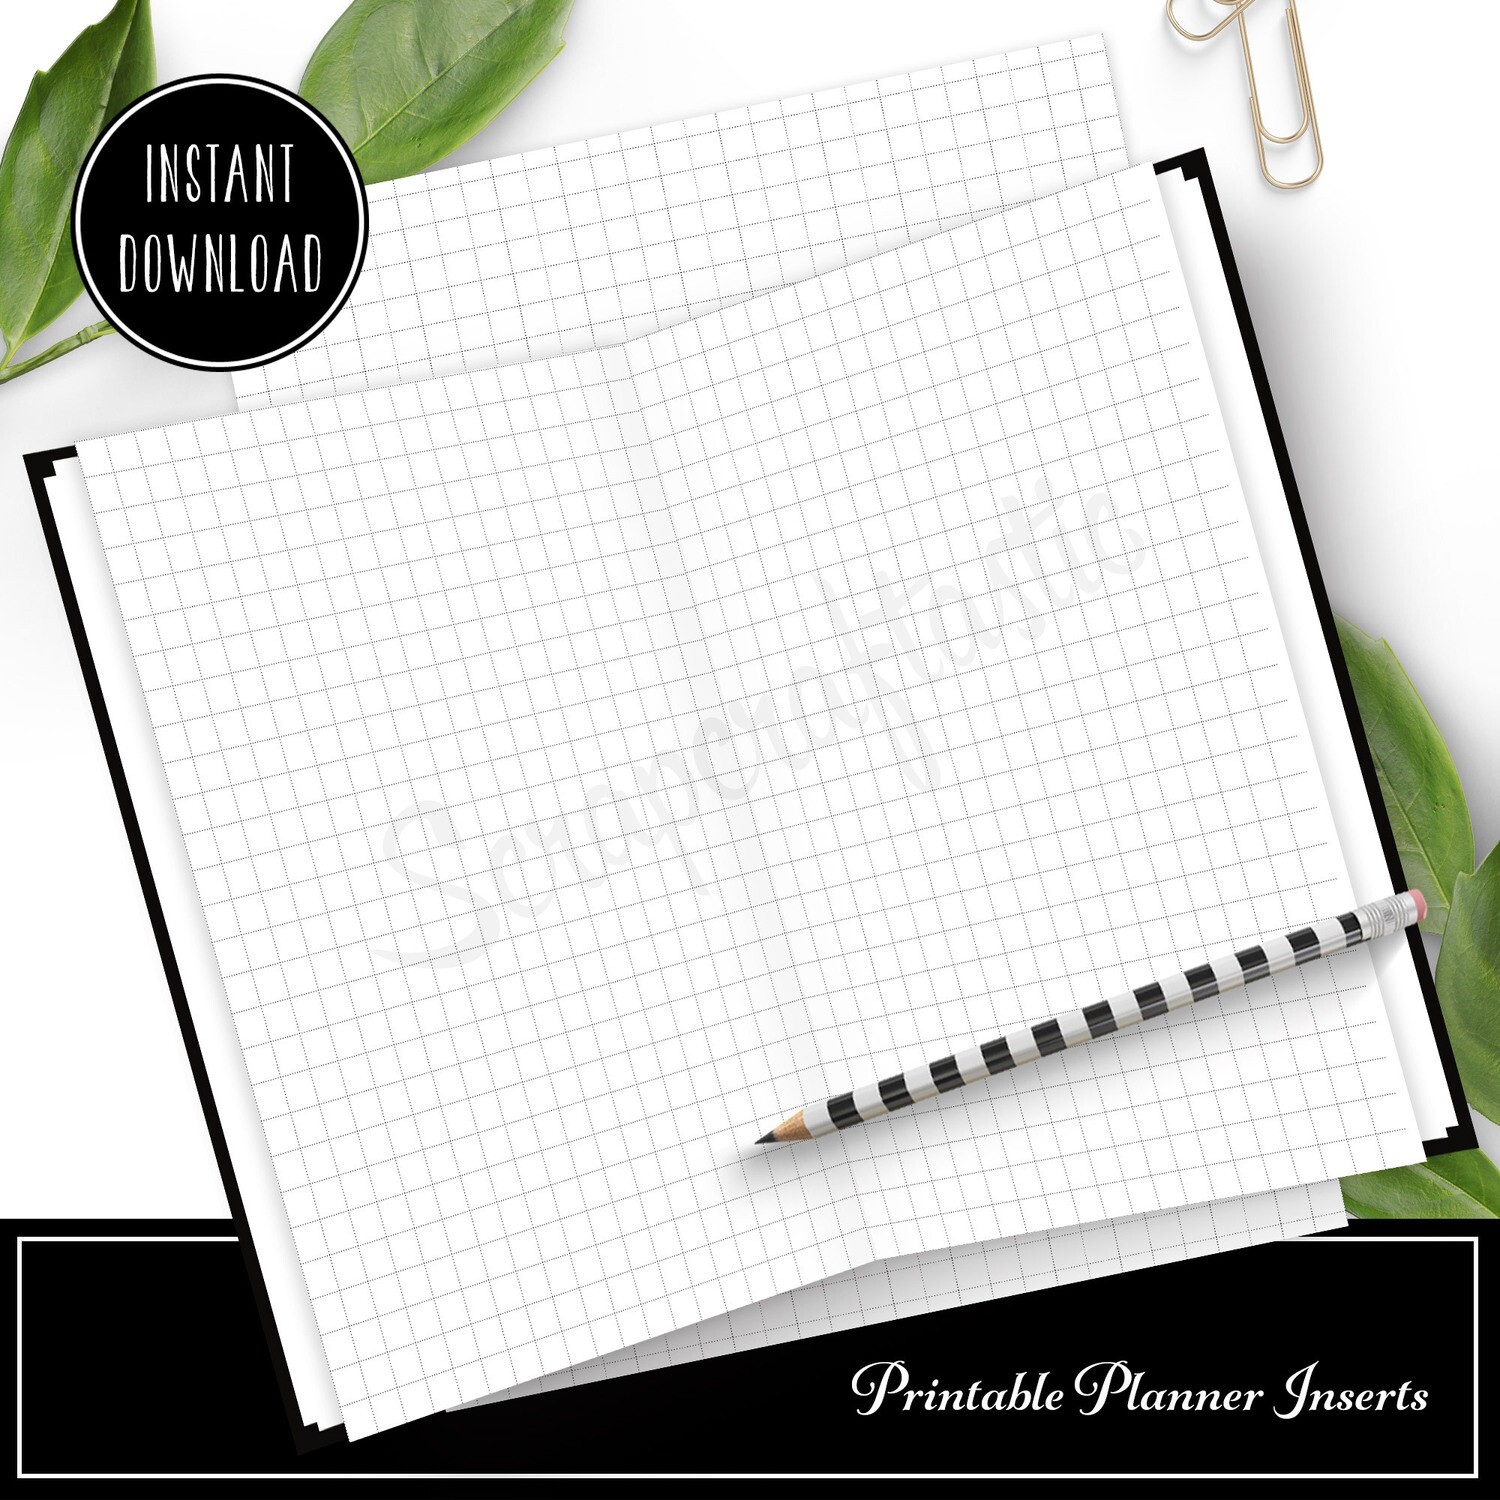 PLANNER BASICS - Printable Grid Pattern for Planners and Traveler's Notebooks